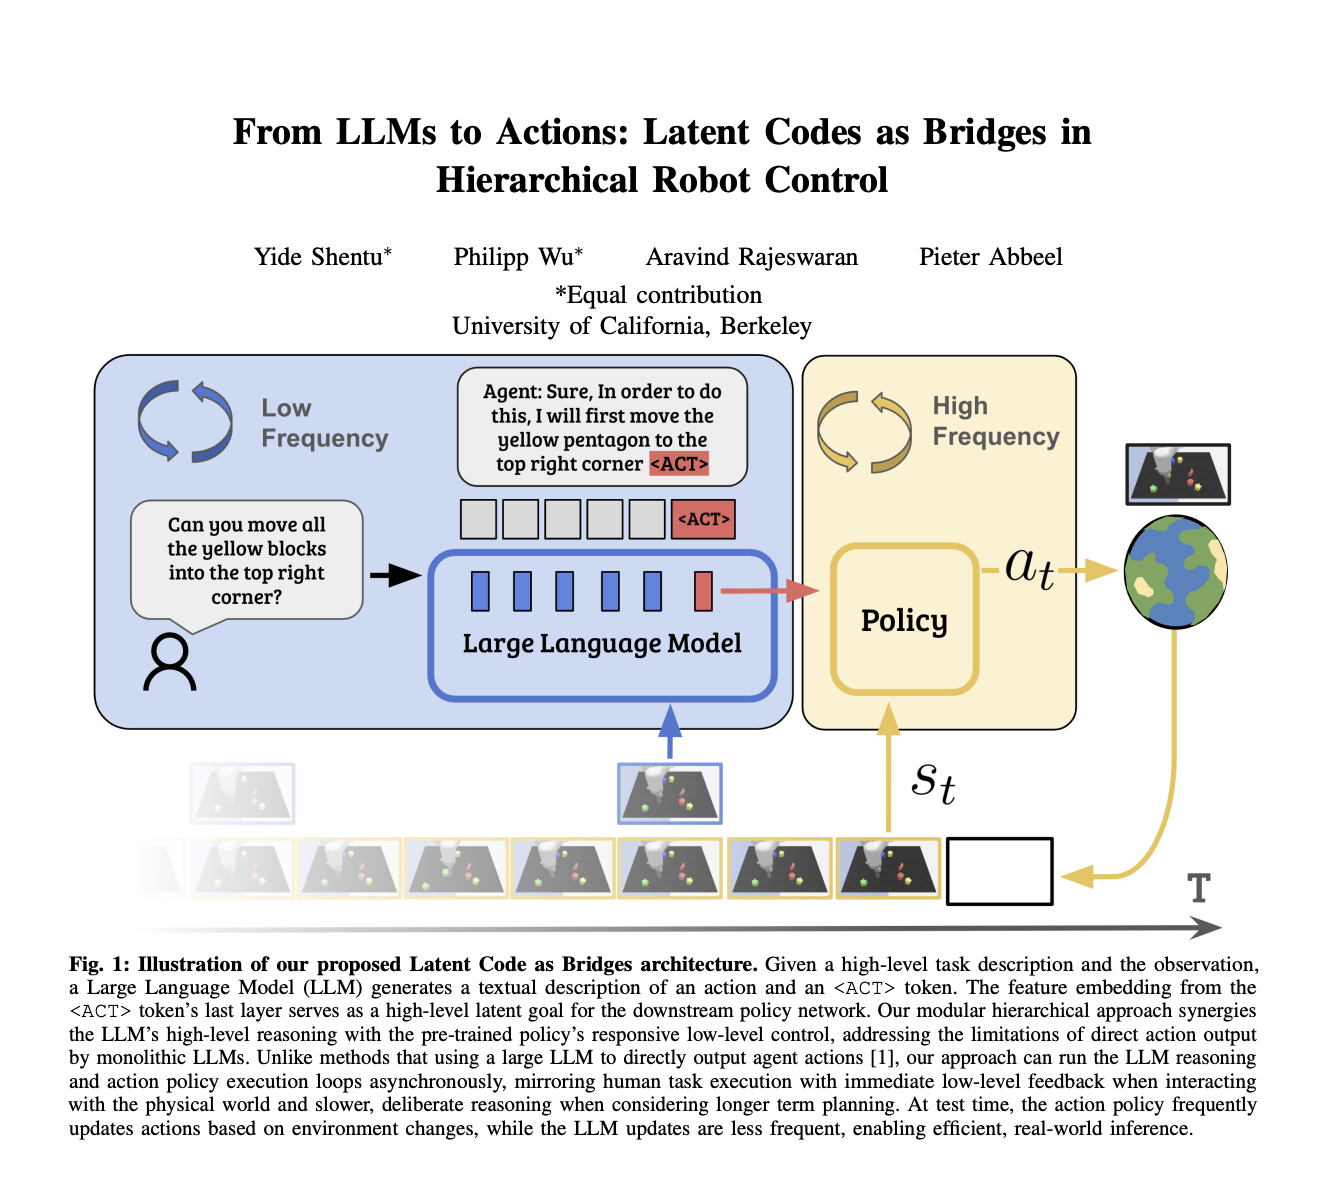  UC Berkeley Researchers Introduce Learnable Latent Codes as Bridges (LCB): A Novel AI Approach that Combines the Abstract Reasoning Capabilities of Large Language Models with Low-Level Action Policies